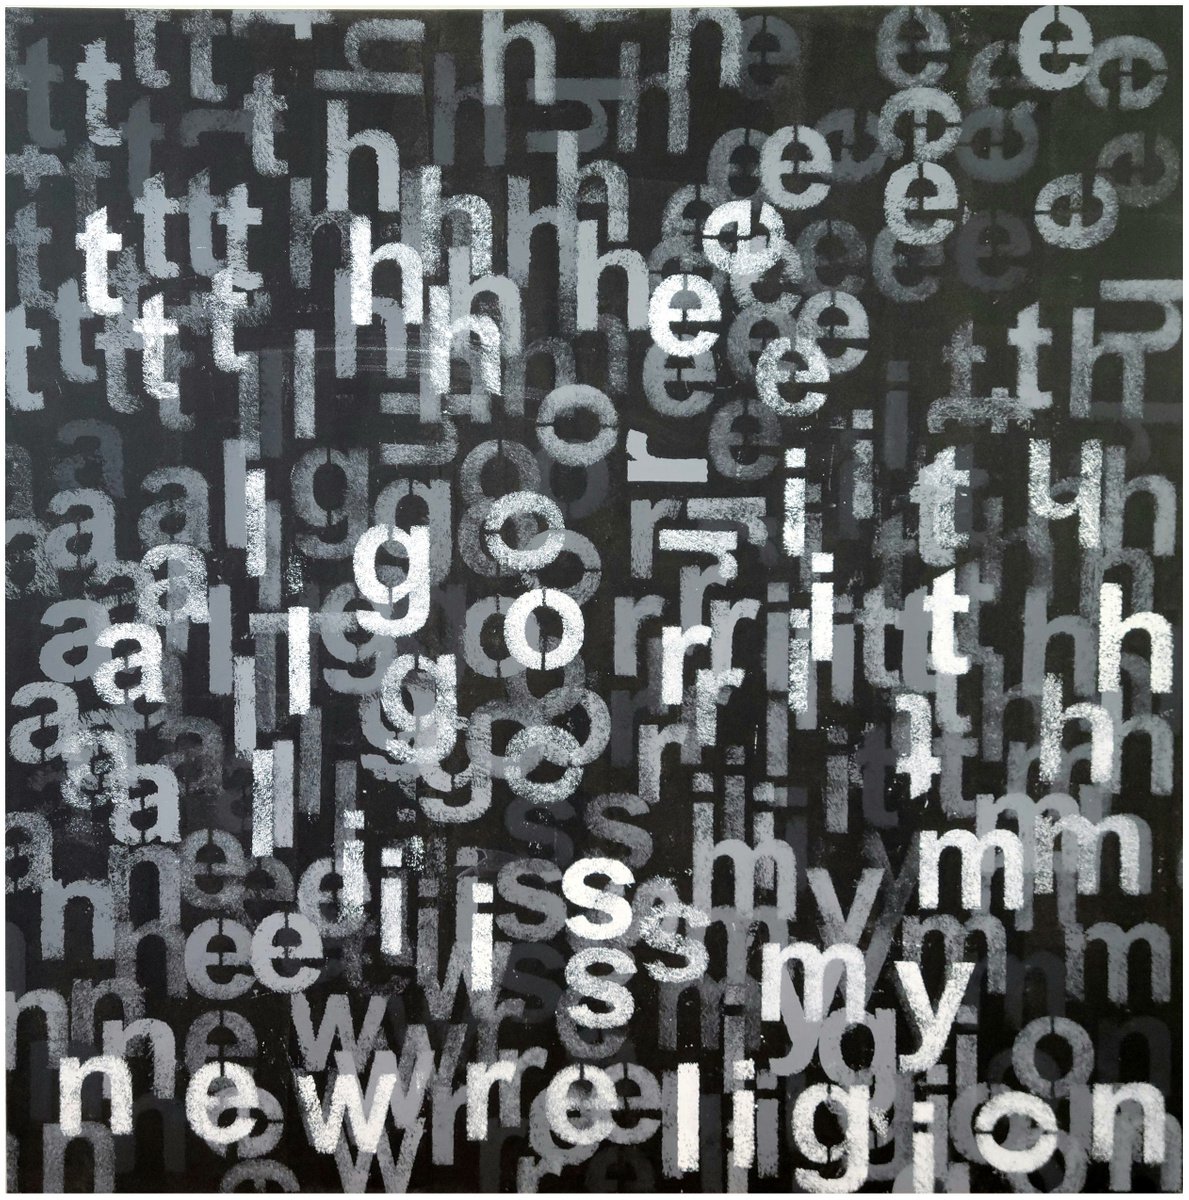 THE ALGORITHM IS MY NEW RELIGION by Patrick Skals